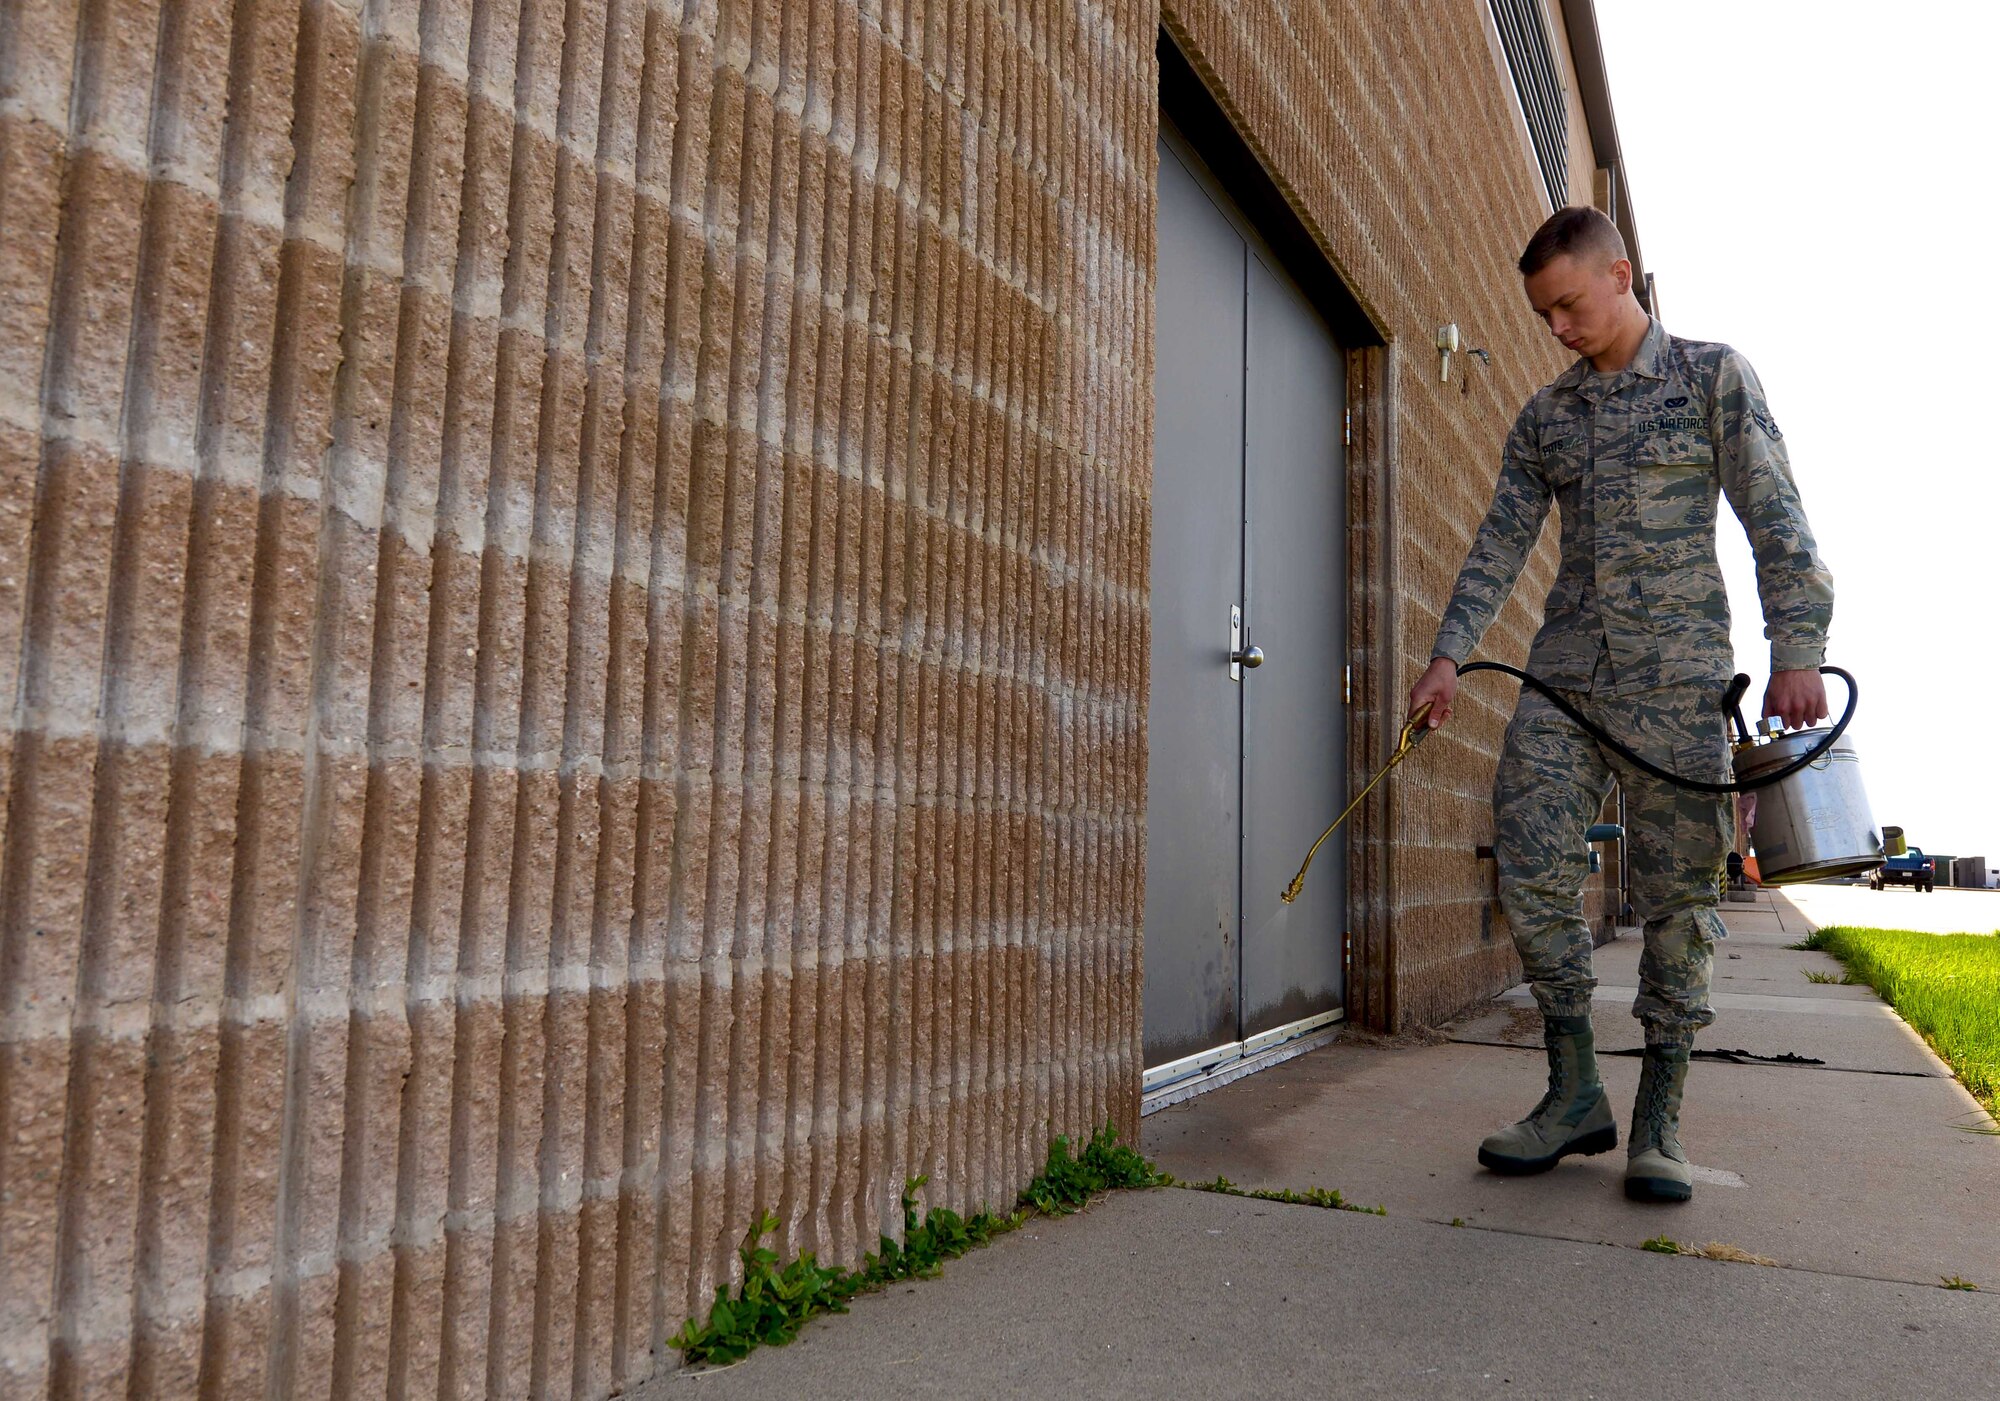 Airman 1st Class David Pitts, a pest management apprentice assigned to the 28th Civil Engineer Squadron, sprays pesticide along the backside of the 28th Maintenance Squadron at Ellsworth Air Force Base, S.D., April 7, 2017. Pest management utilize tools such as mouse traps, live traps, bird, and various sprayers to prevent pests from nesting on base. (U.S. Air Force photo by Airman 1st Class Donald C. Knechtel)